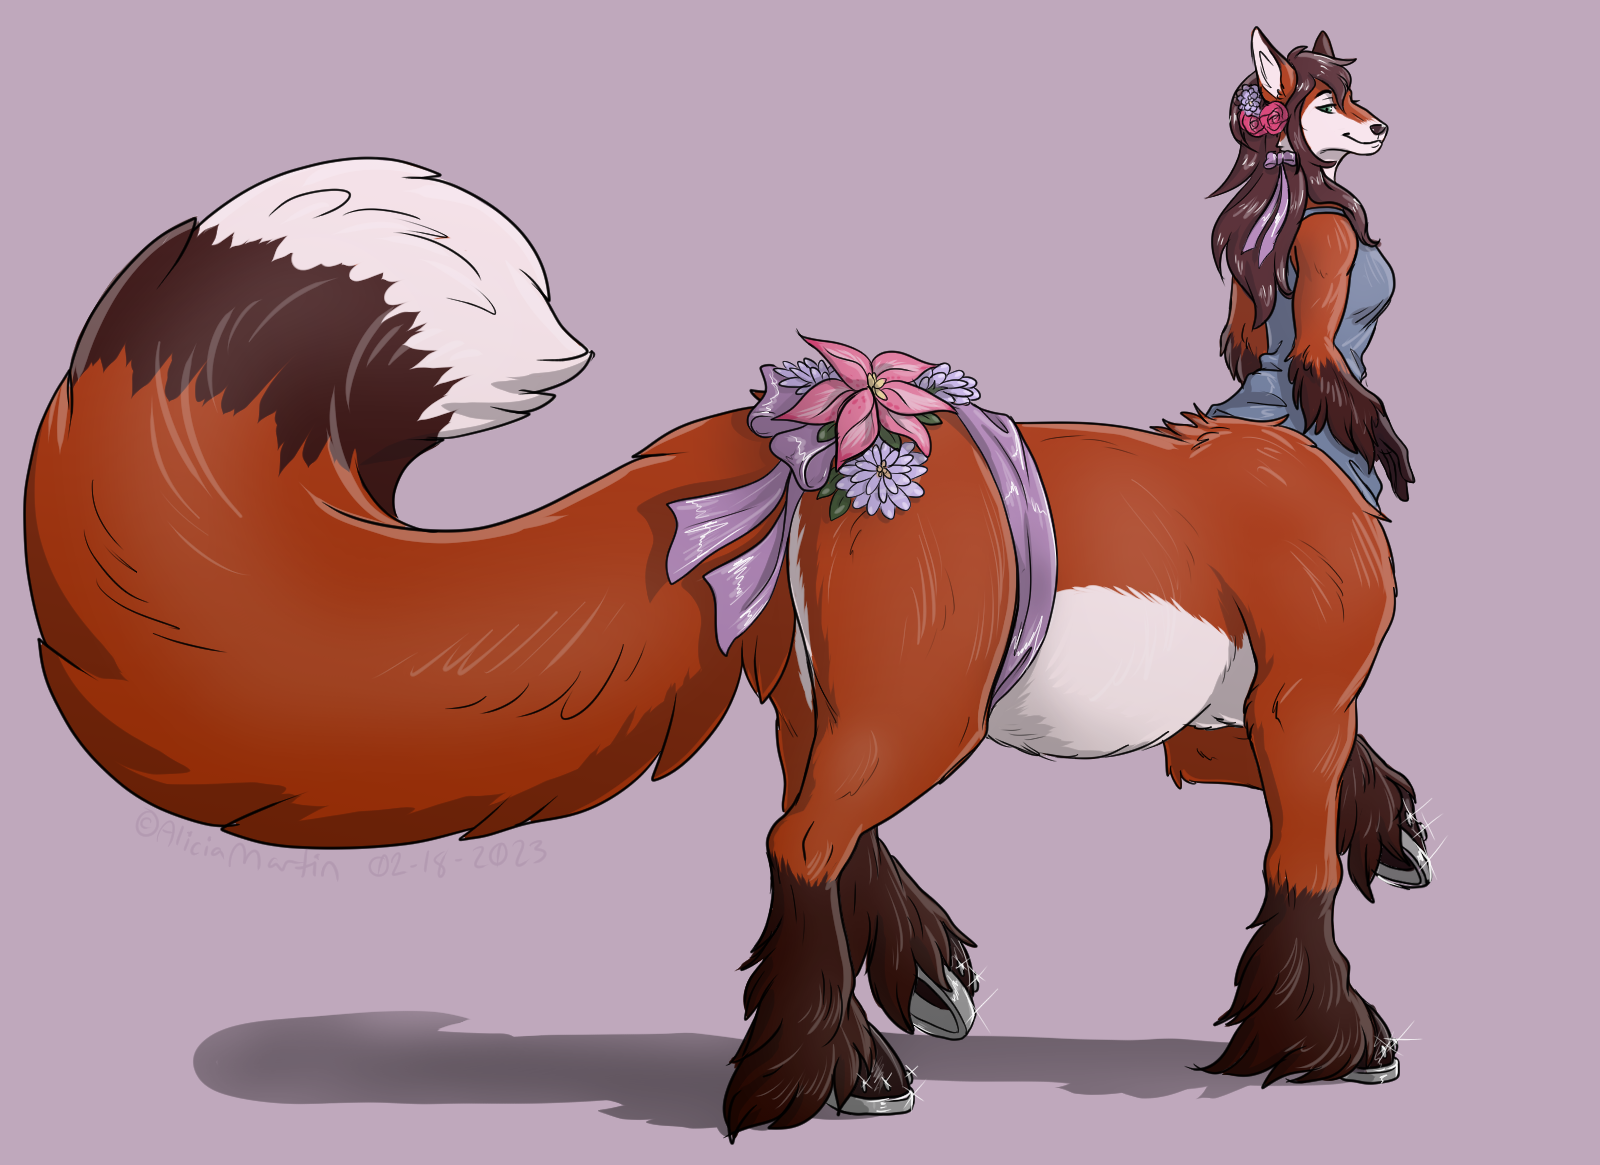 Vulquine in Bloom by Northern-Crosshair -- Fur Affinity dot